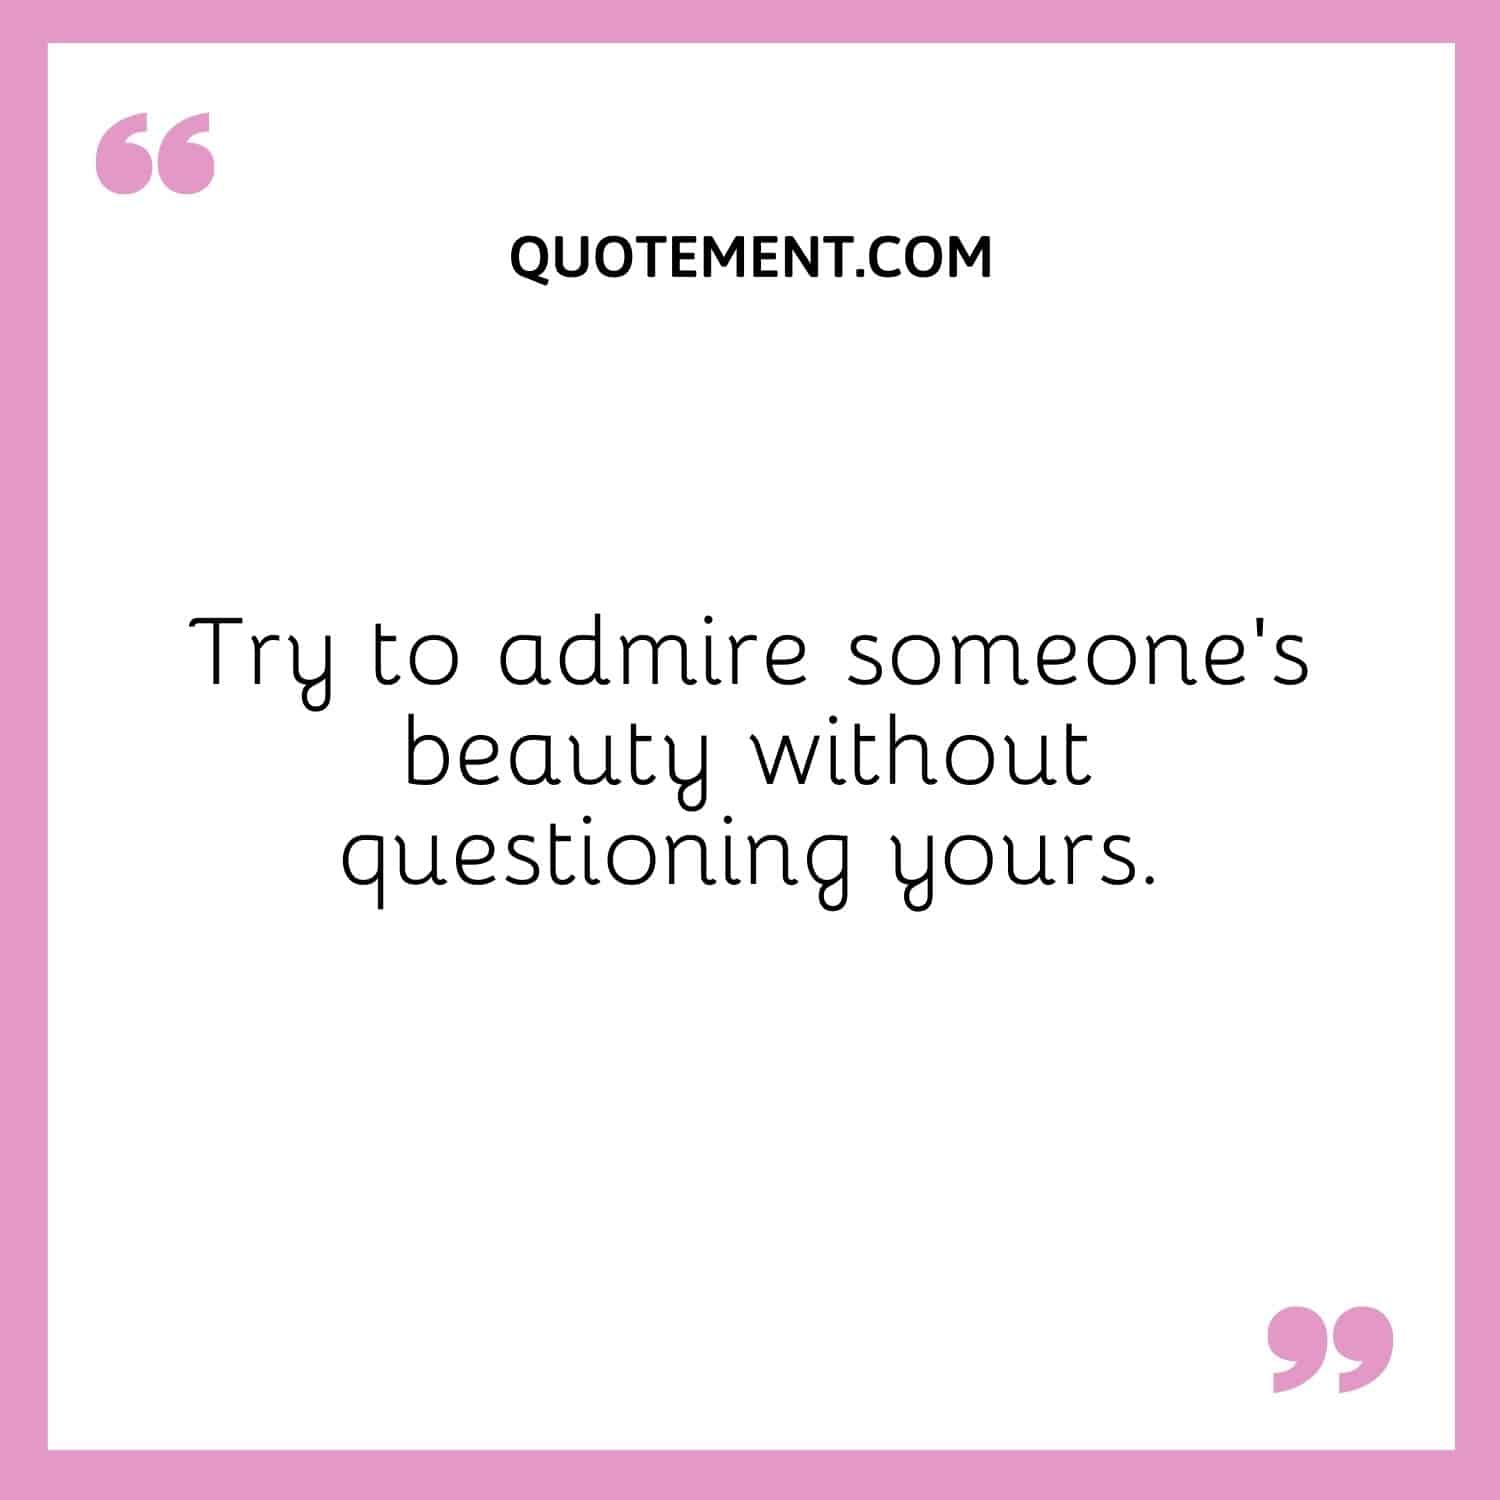 Try to admire someone’s beauty without questioning yours.